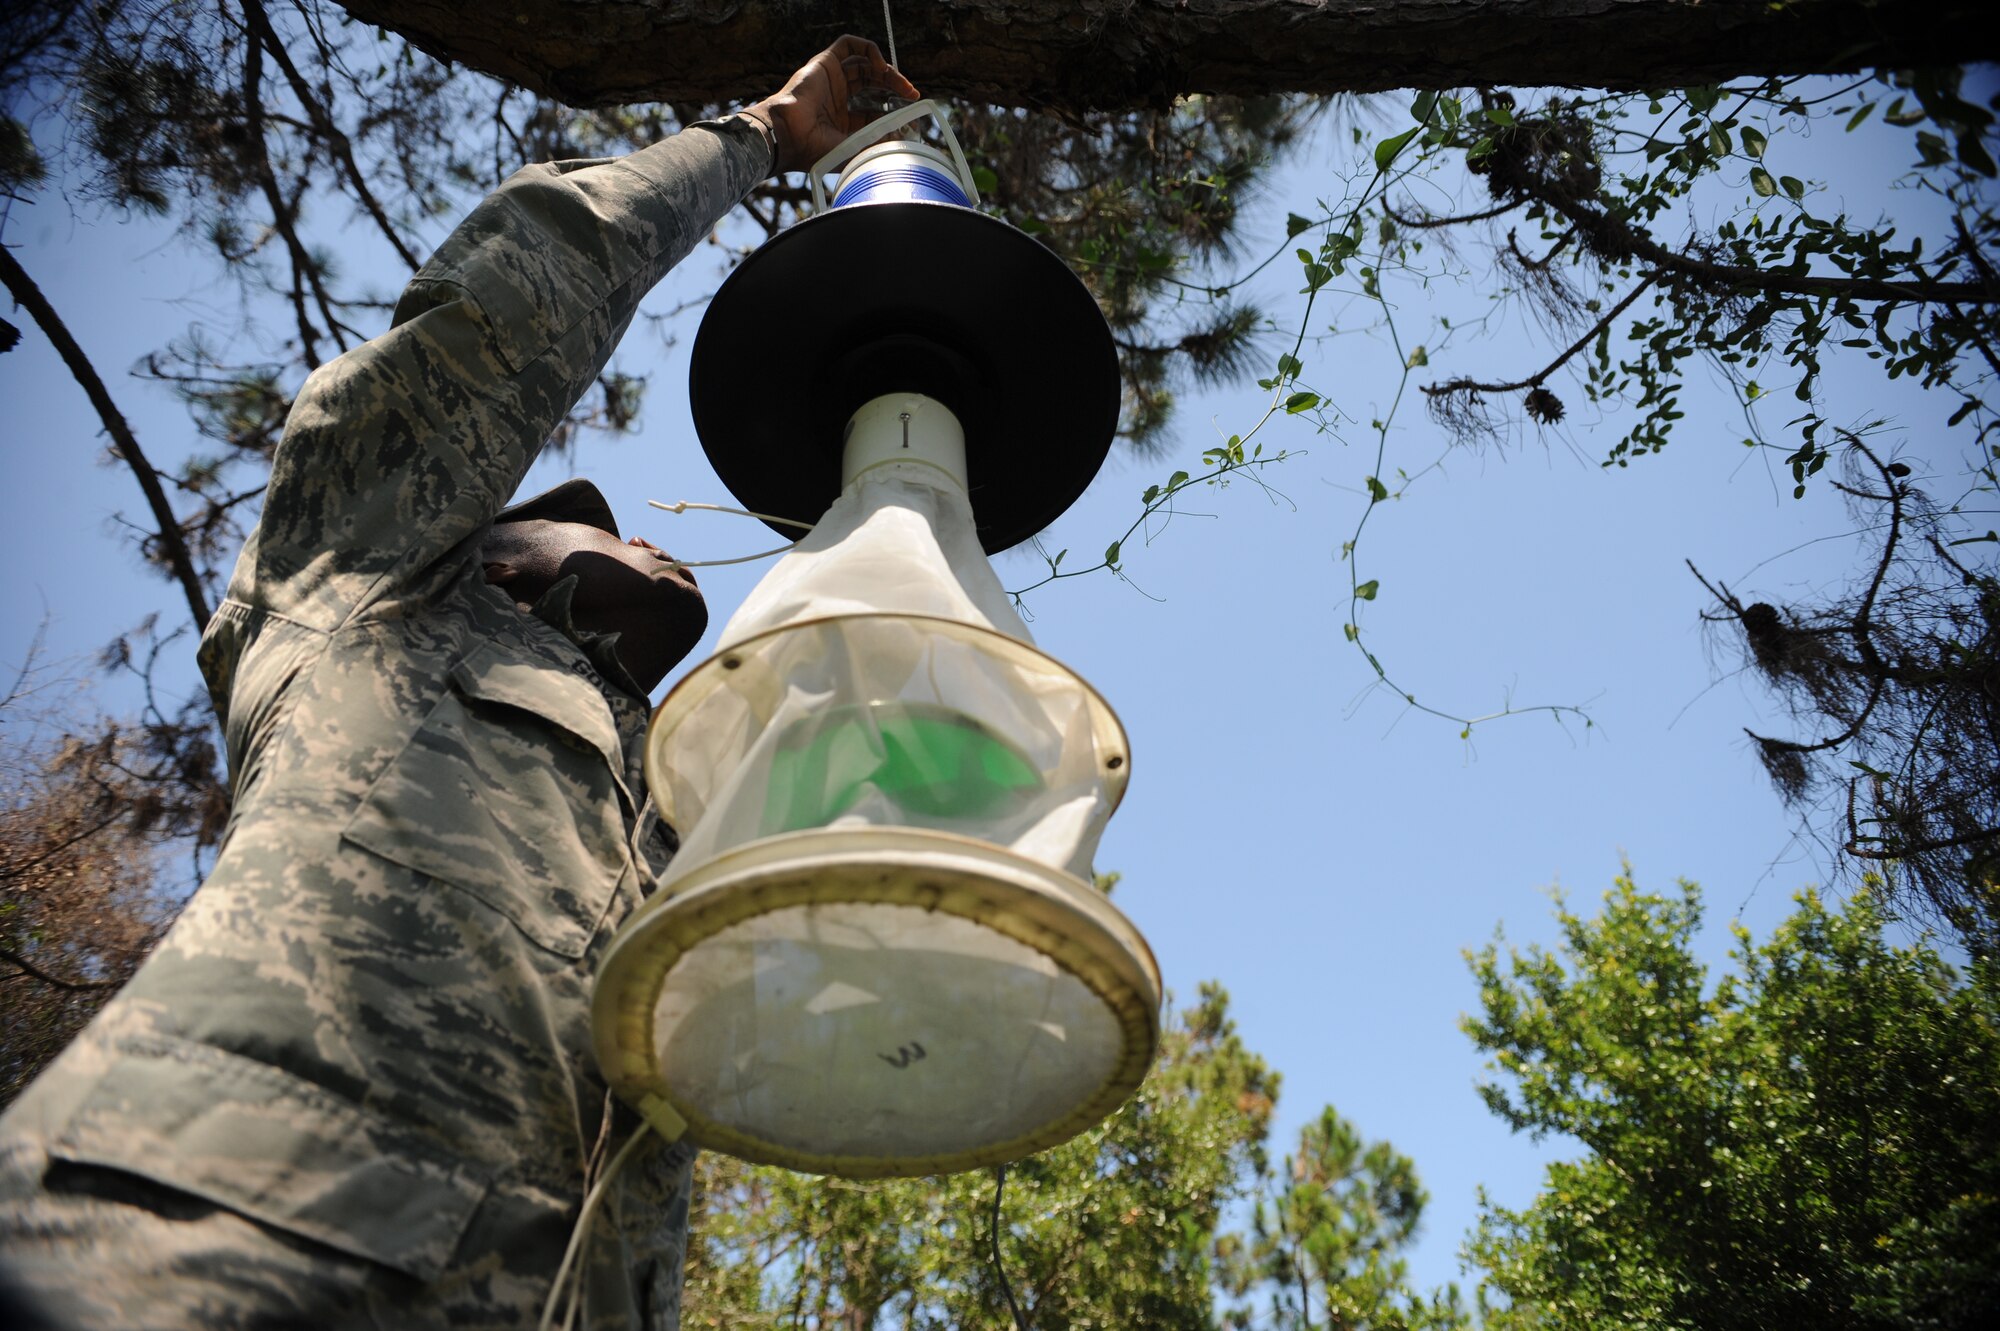 Airman 1st Class Alexander Govan Jr., 6th Aerospace Medicine Squadron public health technician, sets up a mosquito trap at MacDill Air Force Base, Fla., May 20, 2015. After 24- hours, Govan collects the mosquitoes to be frozen in the lab before separating the females and sending them to Wright-Patterson AFB to be tested for diseases, such as malaria, by the head entomologist. (U.S. Air Force photo by Airman 1st Class Danielle Conde/Released)